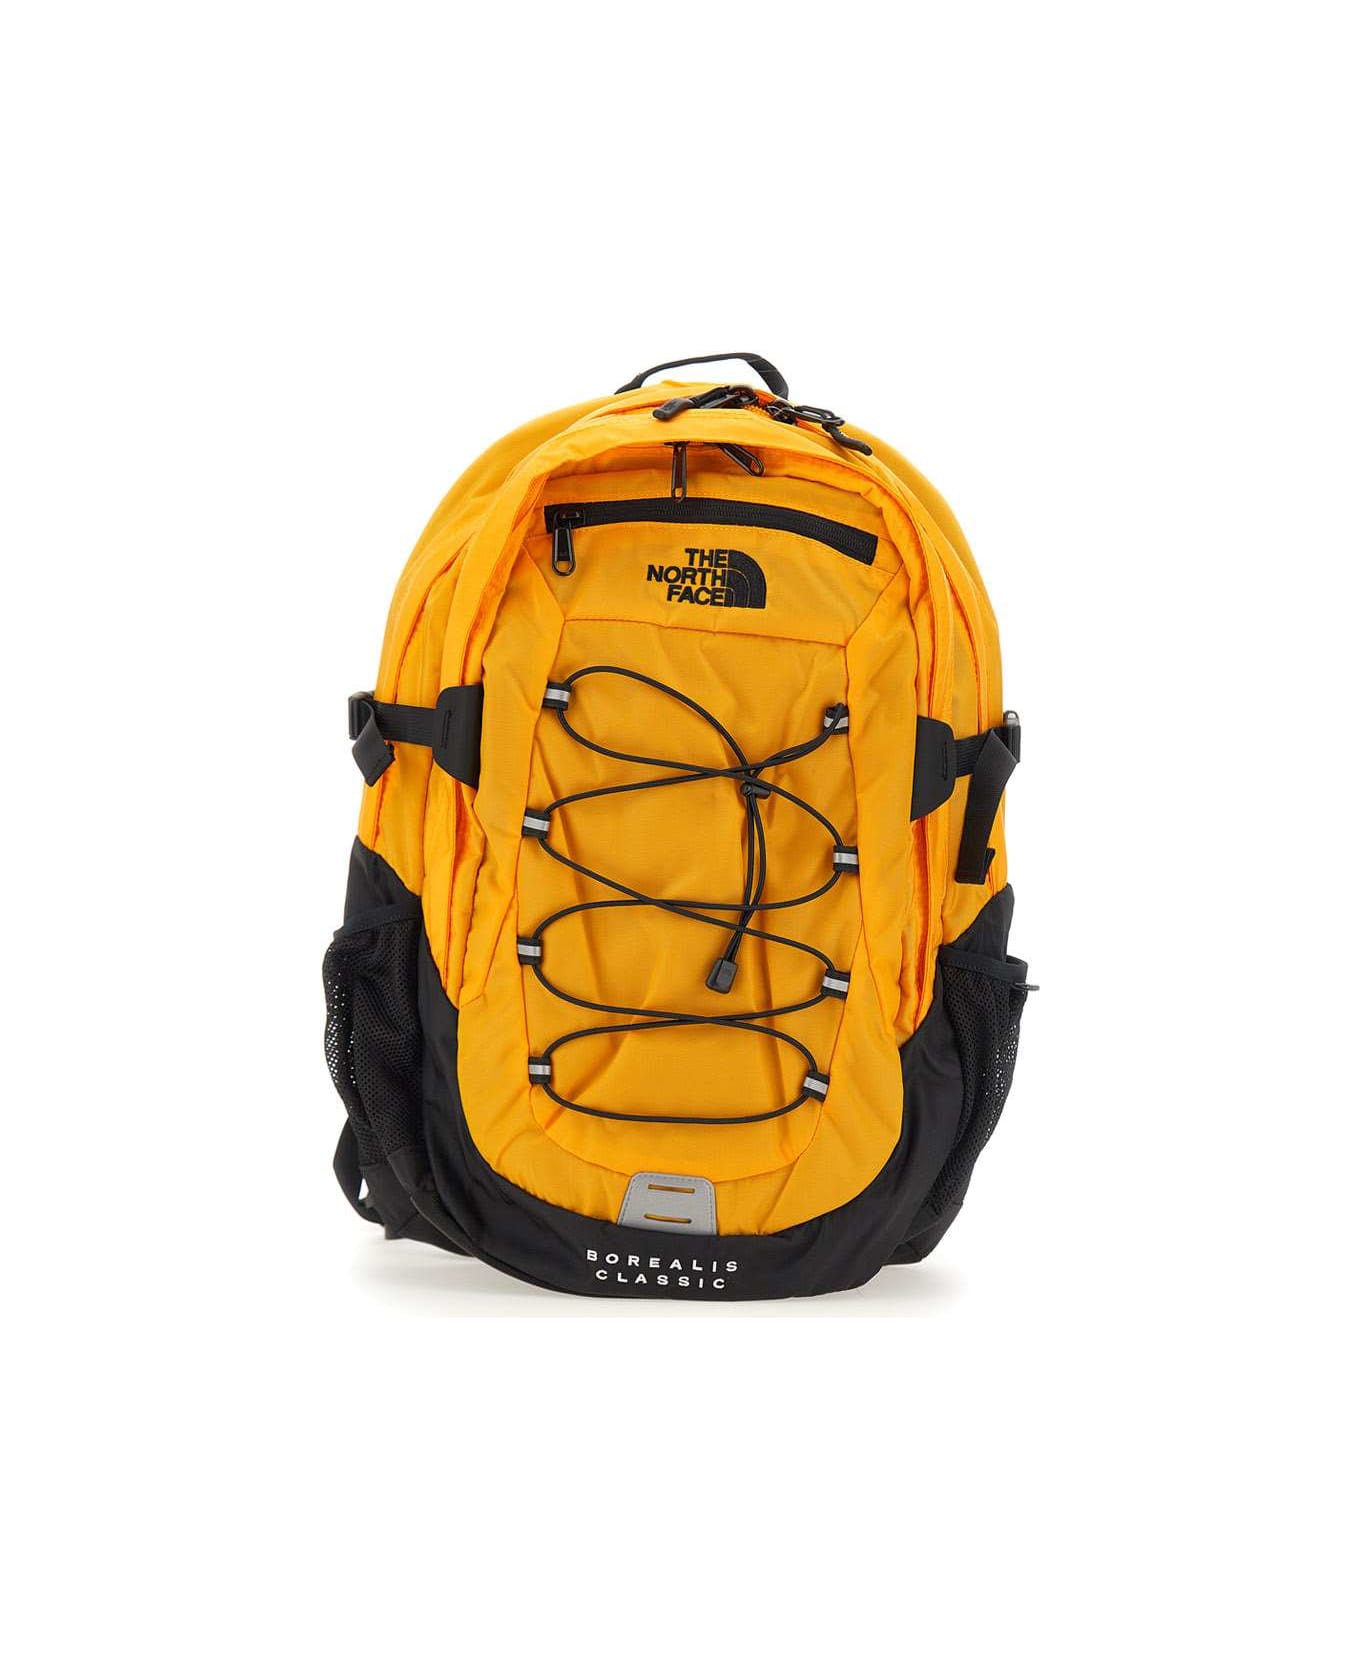 The North Face "borealis Classic" Backpack - YELLOW バックパック